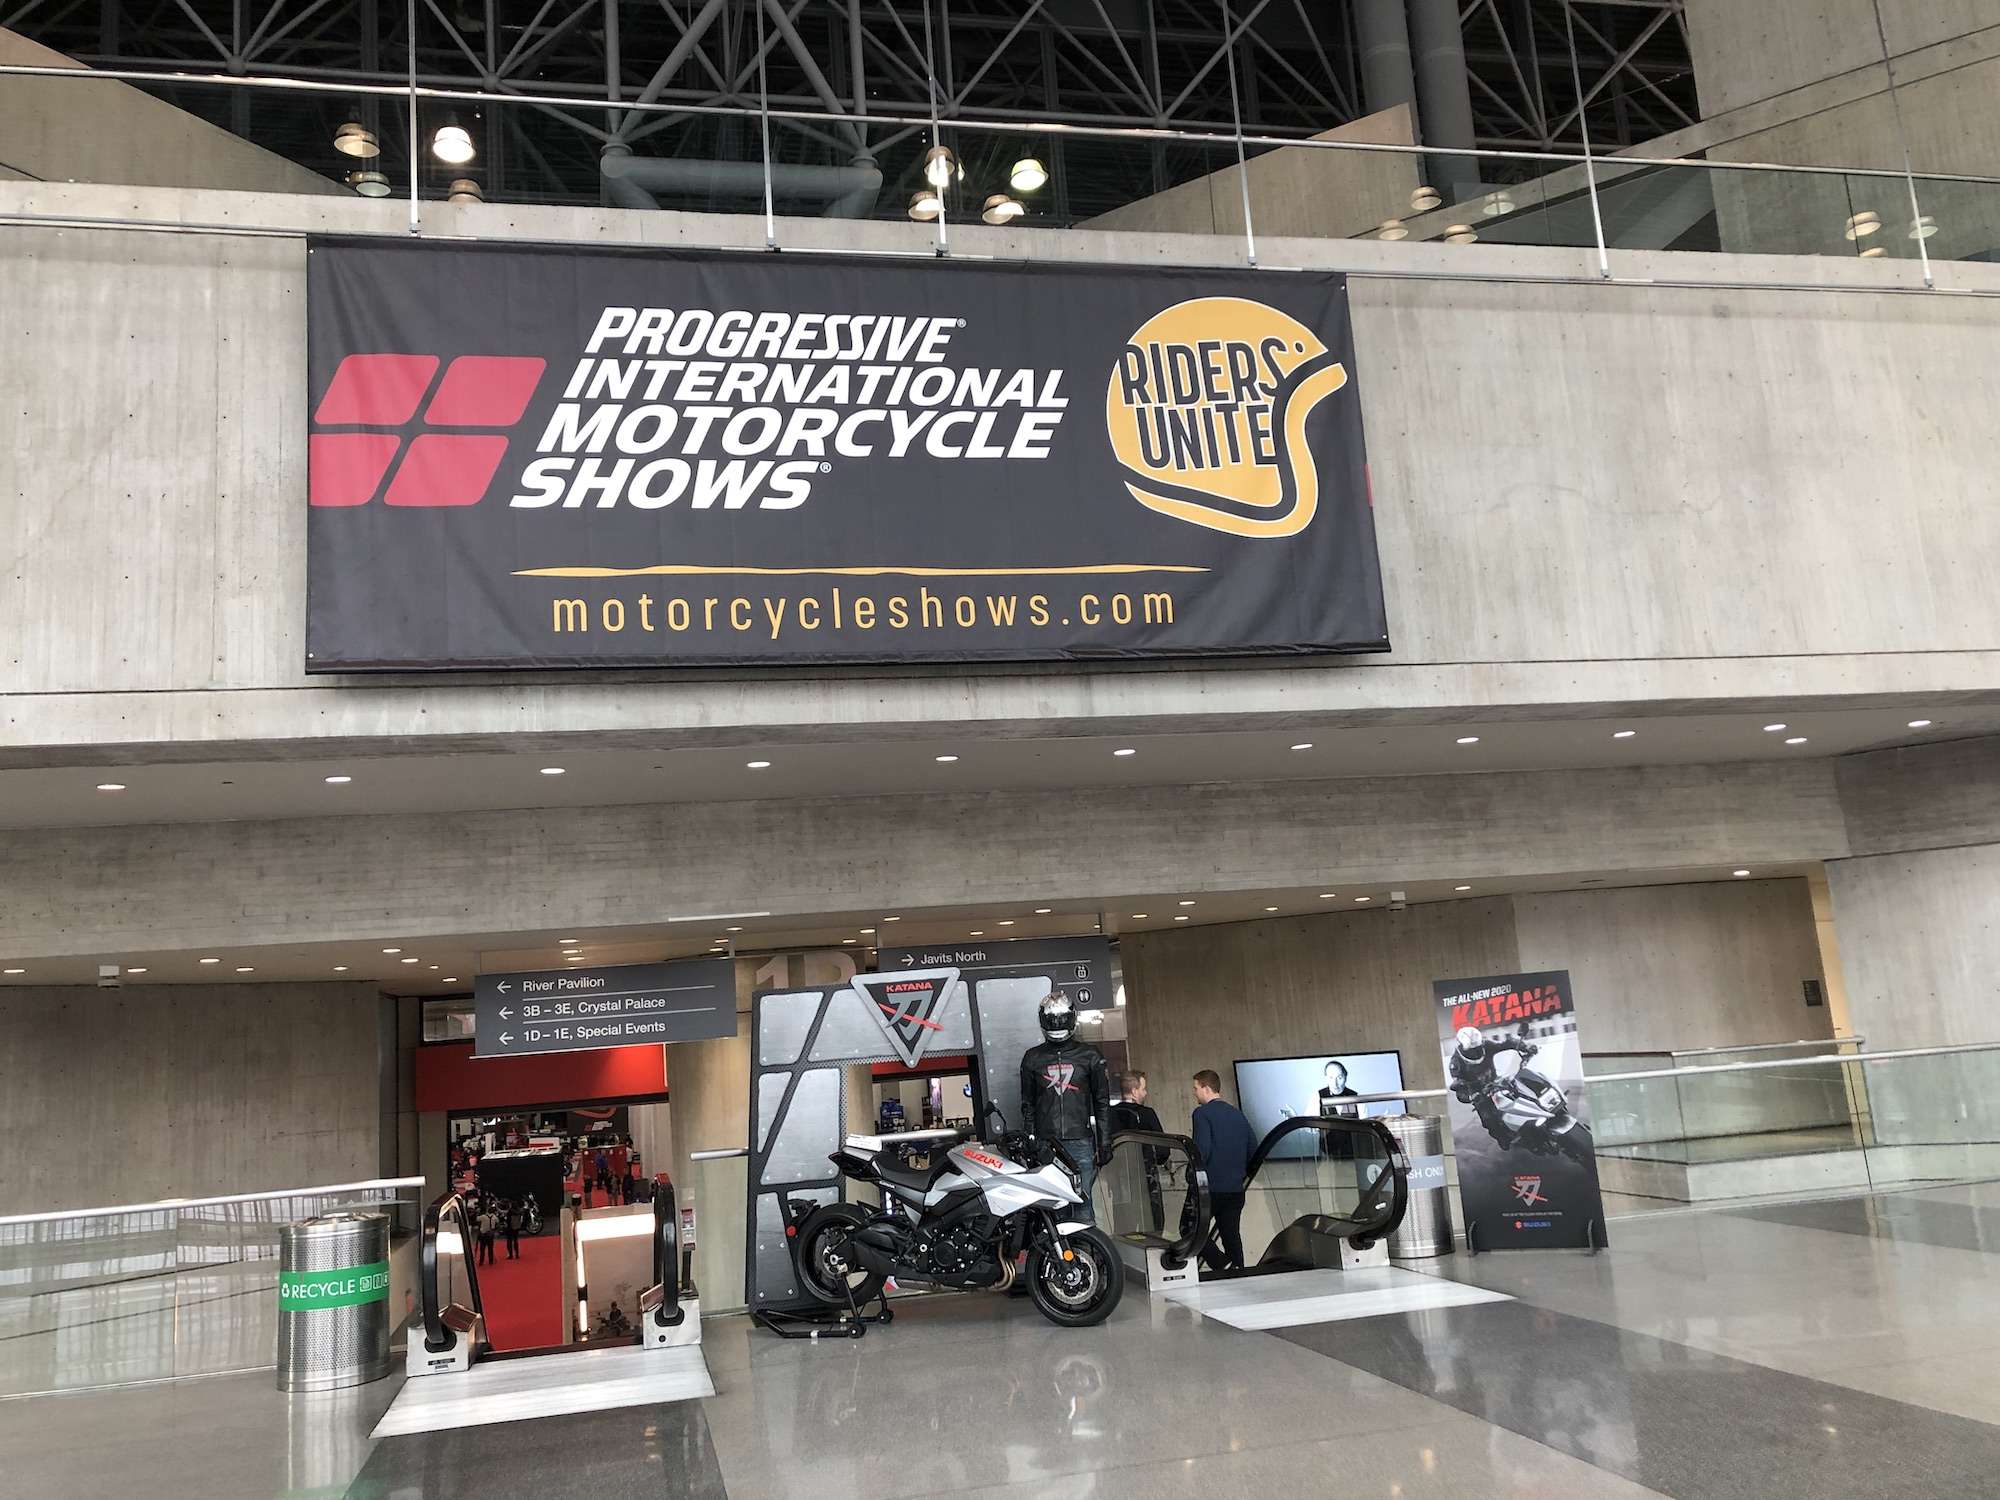 The Motorcycle show pulls into the Javits Center every year between